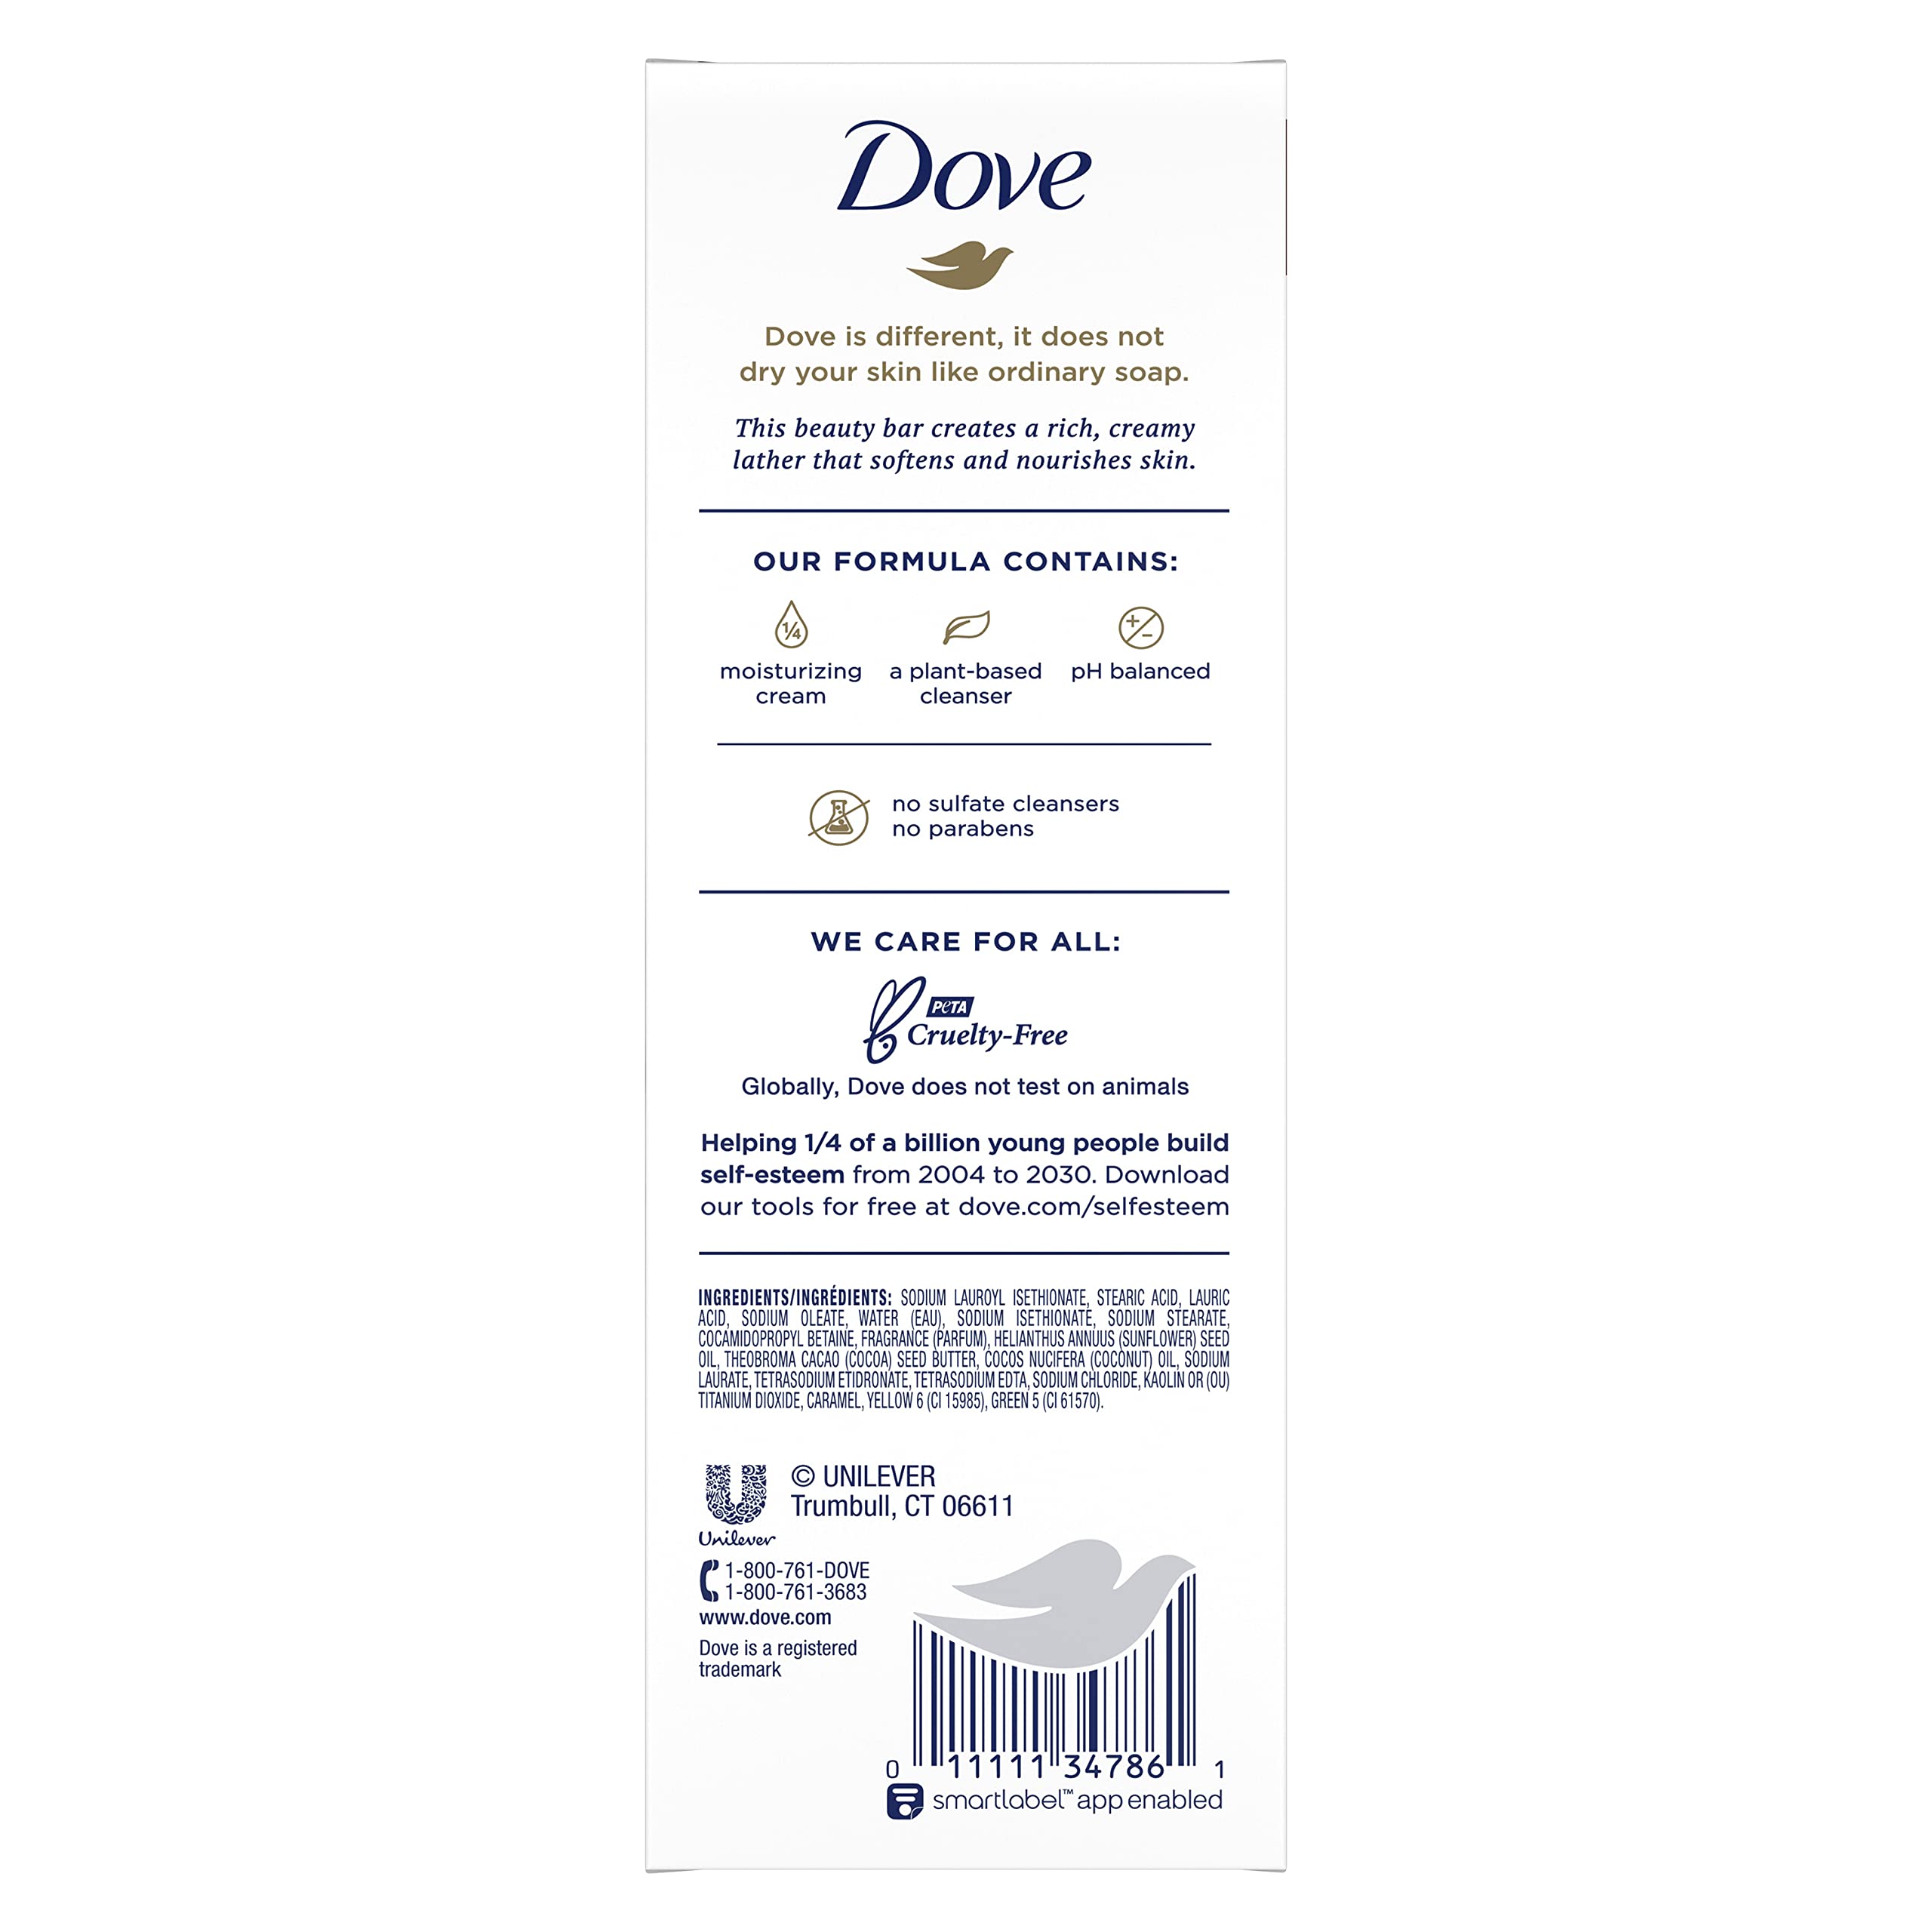 Dove Beauty Bar For Softer Skin Coconut Milk More Moisturizing Than Bar Soap, 3.75 Ounce - 6 Count (Pack of 1) - Packaging May Vary